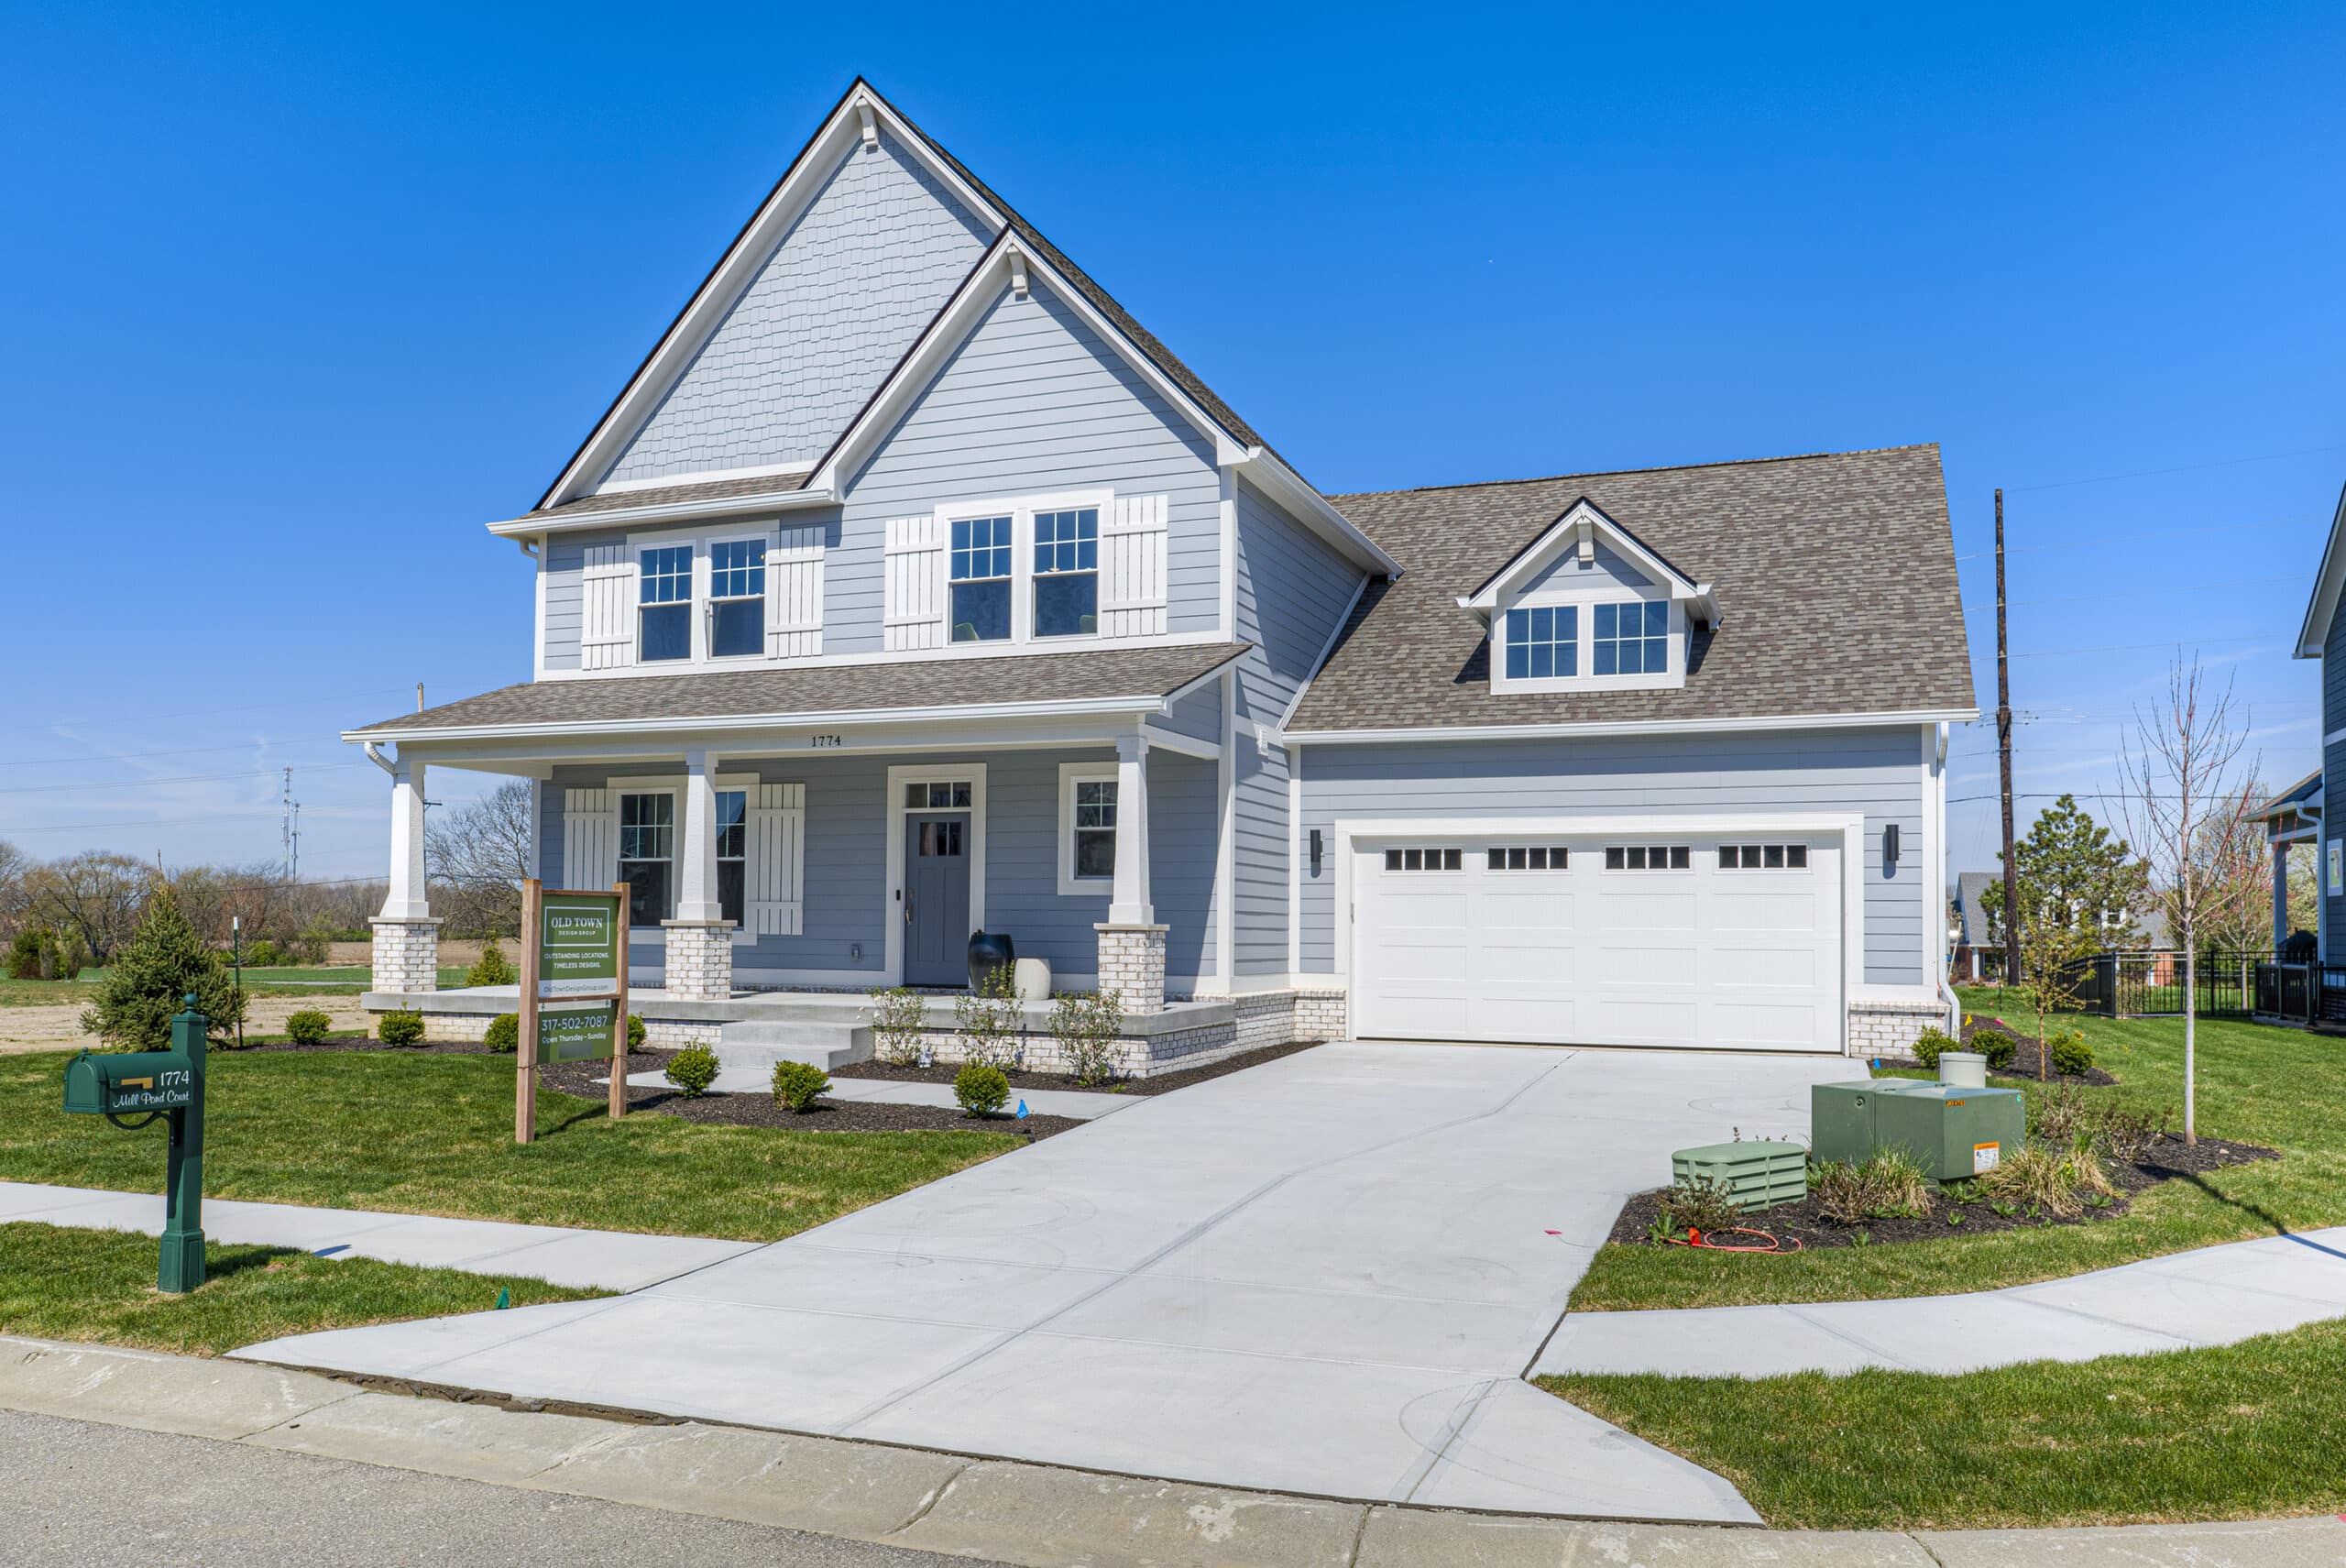 A home with two garages and a driveway, perfect for those in search of a custom-built residence in Fishers or Westfield, Indiana.